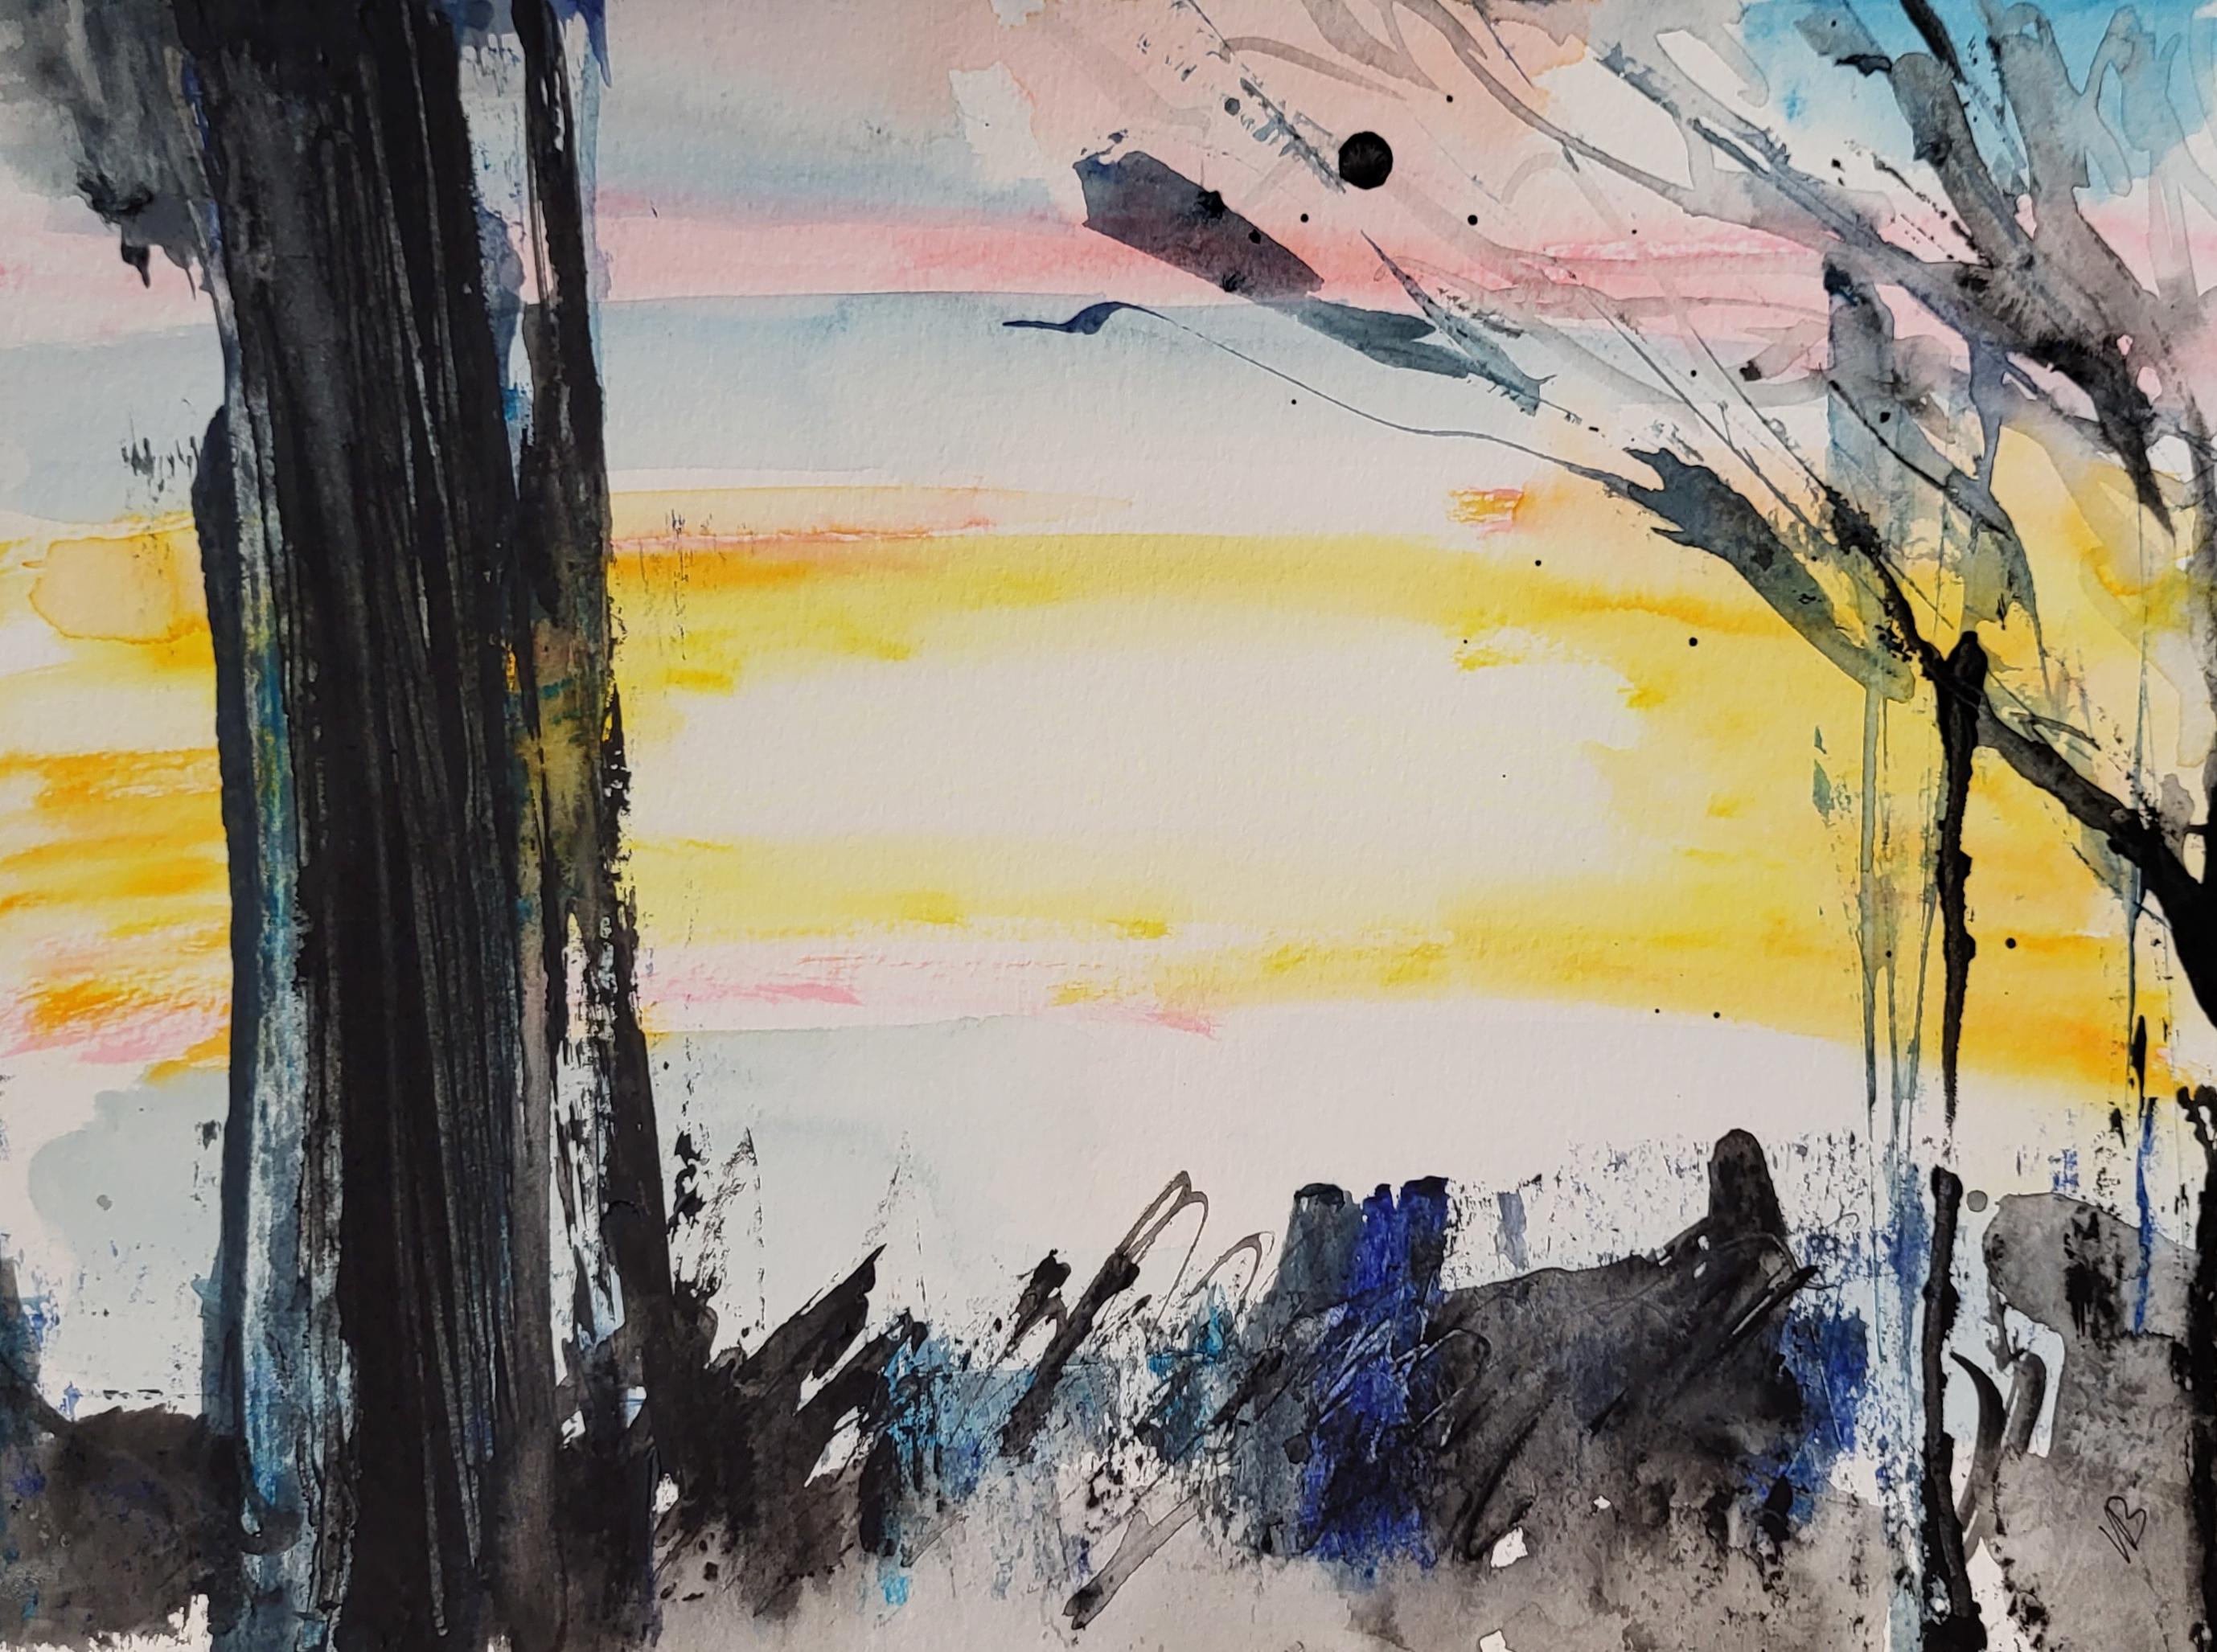 Vian Borchert Abstract Drawing - Sunset, Look Out! -  (Watercolor, Landscape, Sunset painting, landscape